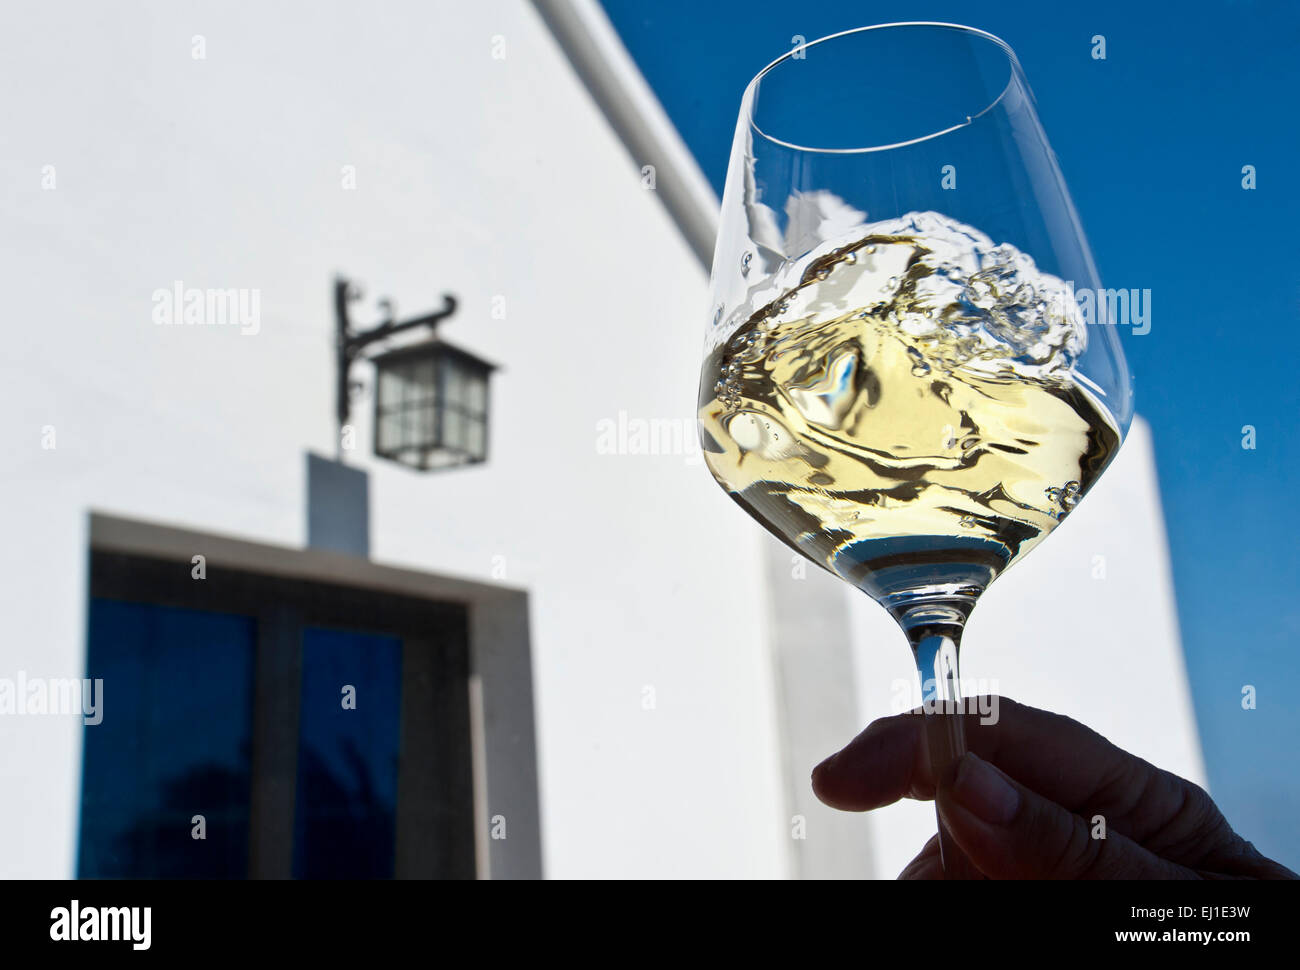 WINE TASTING ALFRESCO swirling and evaluating a glass of white wine in outdoor alfresco vacation winery holiday sunny wine tasting situation Stock Photo